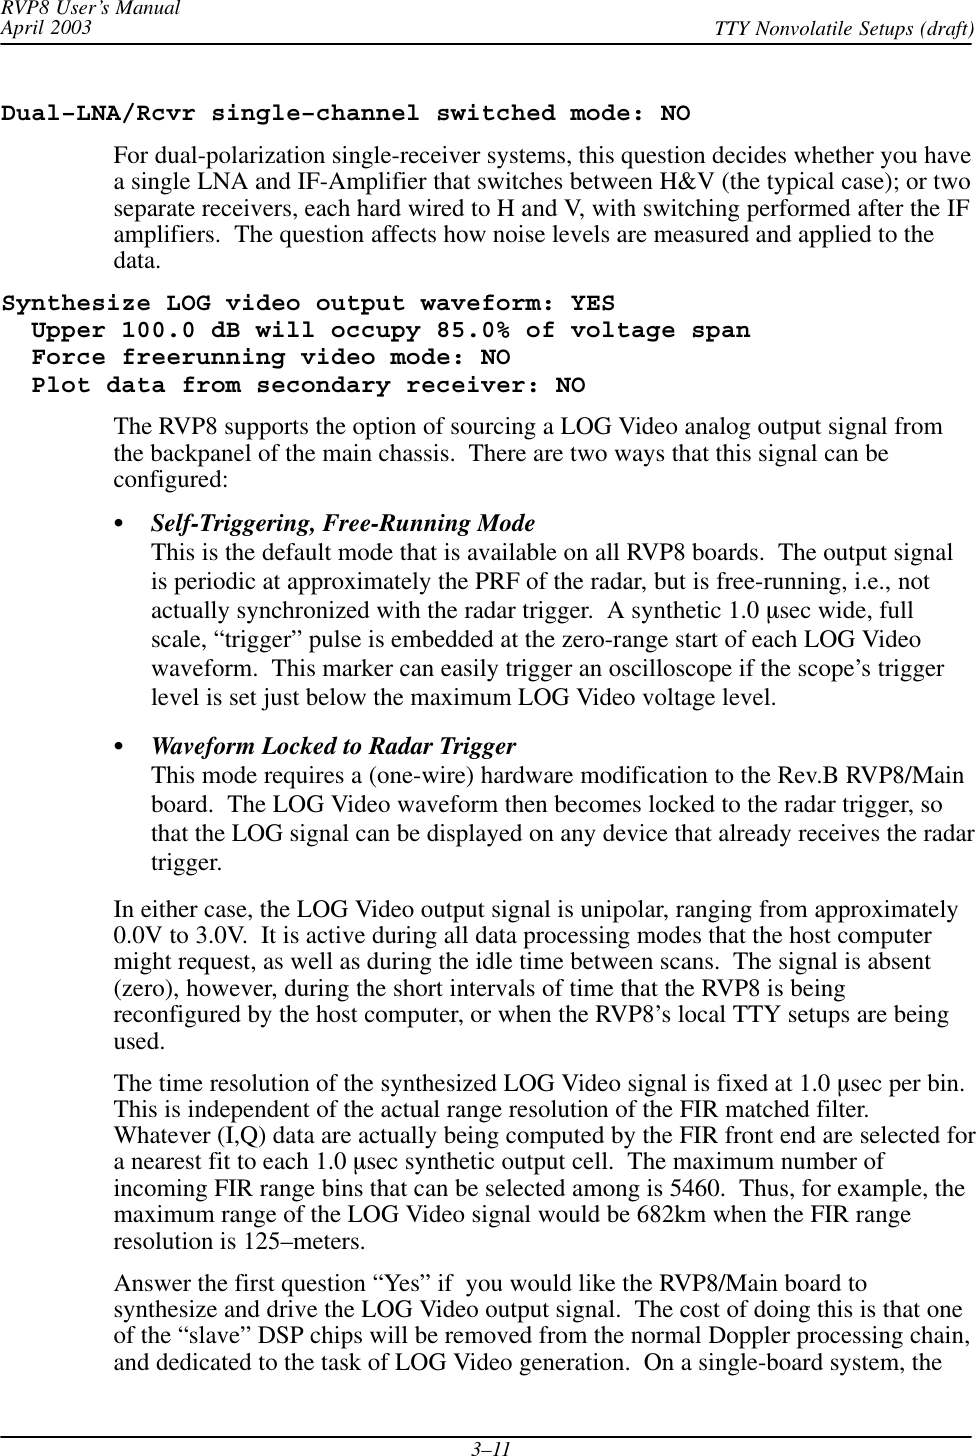 RVP8 User’s ManualApril 2003 TTY Nonvolatile Setups (draft)3–11Dual–LNA/Rcvr single–channel switched mode: NOFor dual-polarization single-receiver systems, this question decides whether you havea single LNA and IF-Amplifier that switches between H&amp;V (the typical case); or twoseparate receivers, each hard wired to H and V, with switching performed after the IFamplifiers.  The question affects how noise levels are measured and applied to thedata.Synthesize LOG video output waveform: YES  Upper 100.0 dB will occupy 85.0% of voltage span  Force freerunning video mode: NO  Plot data from secondary receiver: NOThe RVP8 supports the option of sourcing a LOG Video analog output signal fromthe backpanel of the main chassis.  There are two ways that this signal can beconfigured:SSelf-Triggering, Free-Running ModeThis is the default mode that is available on all RVP8 boards.  The output signalis periodic at approximately the PRF of the radar, but is free-running, i.e., notactually synchronized with the radar trigger.  A synthetic 1.0 msec wide, fullscale, “trigger” pulse is embedded at the zero-range start of each LOG Videowaveform.  This marker can easily trigger an oscilloscope if the scope’s triggerlevel is set just below the maximum LOG Video voltage level.SWaveform Locked to Radar TriggerThis mode requires a (one-wire) hardware modification to the Rev.B RVP8/Mainboard.  The LOG Video waveform then becomes locked to the radar trigger, sothat the LOG signal can be displayed on any device that already receives the radartrigger.In either case, the LOG Video output signal is unipolar, ranging from approximately0.0V to 3.0V.  It is active during all data processing modes that the host computermight request, as well as during the idle time between scans.  The signal is absent(zero), however, during the short intervals of time that the RVP8 is beingreconfigured by the host computer, or when the RVP8’s local TTY setups are beingused.The time resolution of the synthesized LOG Video signal is fixed at 1.0 msec per bin.This is independent of the actual range resolution of the FIR matched filter.Whatever (I,Q) data are actually being computed by the FIR front end are selected fora nearest fit to each 1.0 msec synthetic output cell.  The maximum number ofincoming FIR range bins that can be selected among is 5460.  Thus, for example, themaximum range of the LOG Video signal would be 682km when the FIR rangeresolution is 125–meters.Answer the first question “Yes” if  you would like the RVP8/Main board tosynthesize and drive the LOG Video output signal.  The cost of doing this is that oneof the “slave” DSP chips will be removed from the normal Doppler processing chain,and dedicated to the task of LOG Video generation.  On a single-board system, the